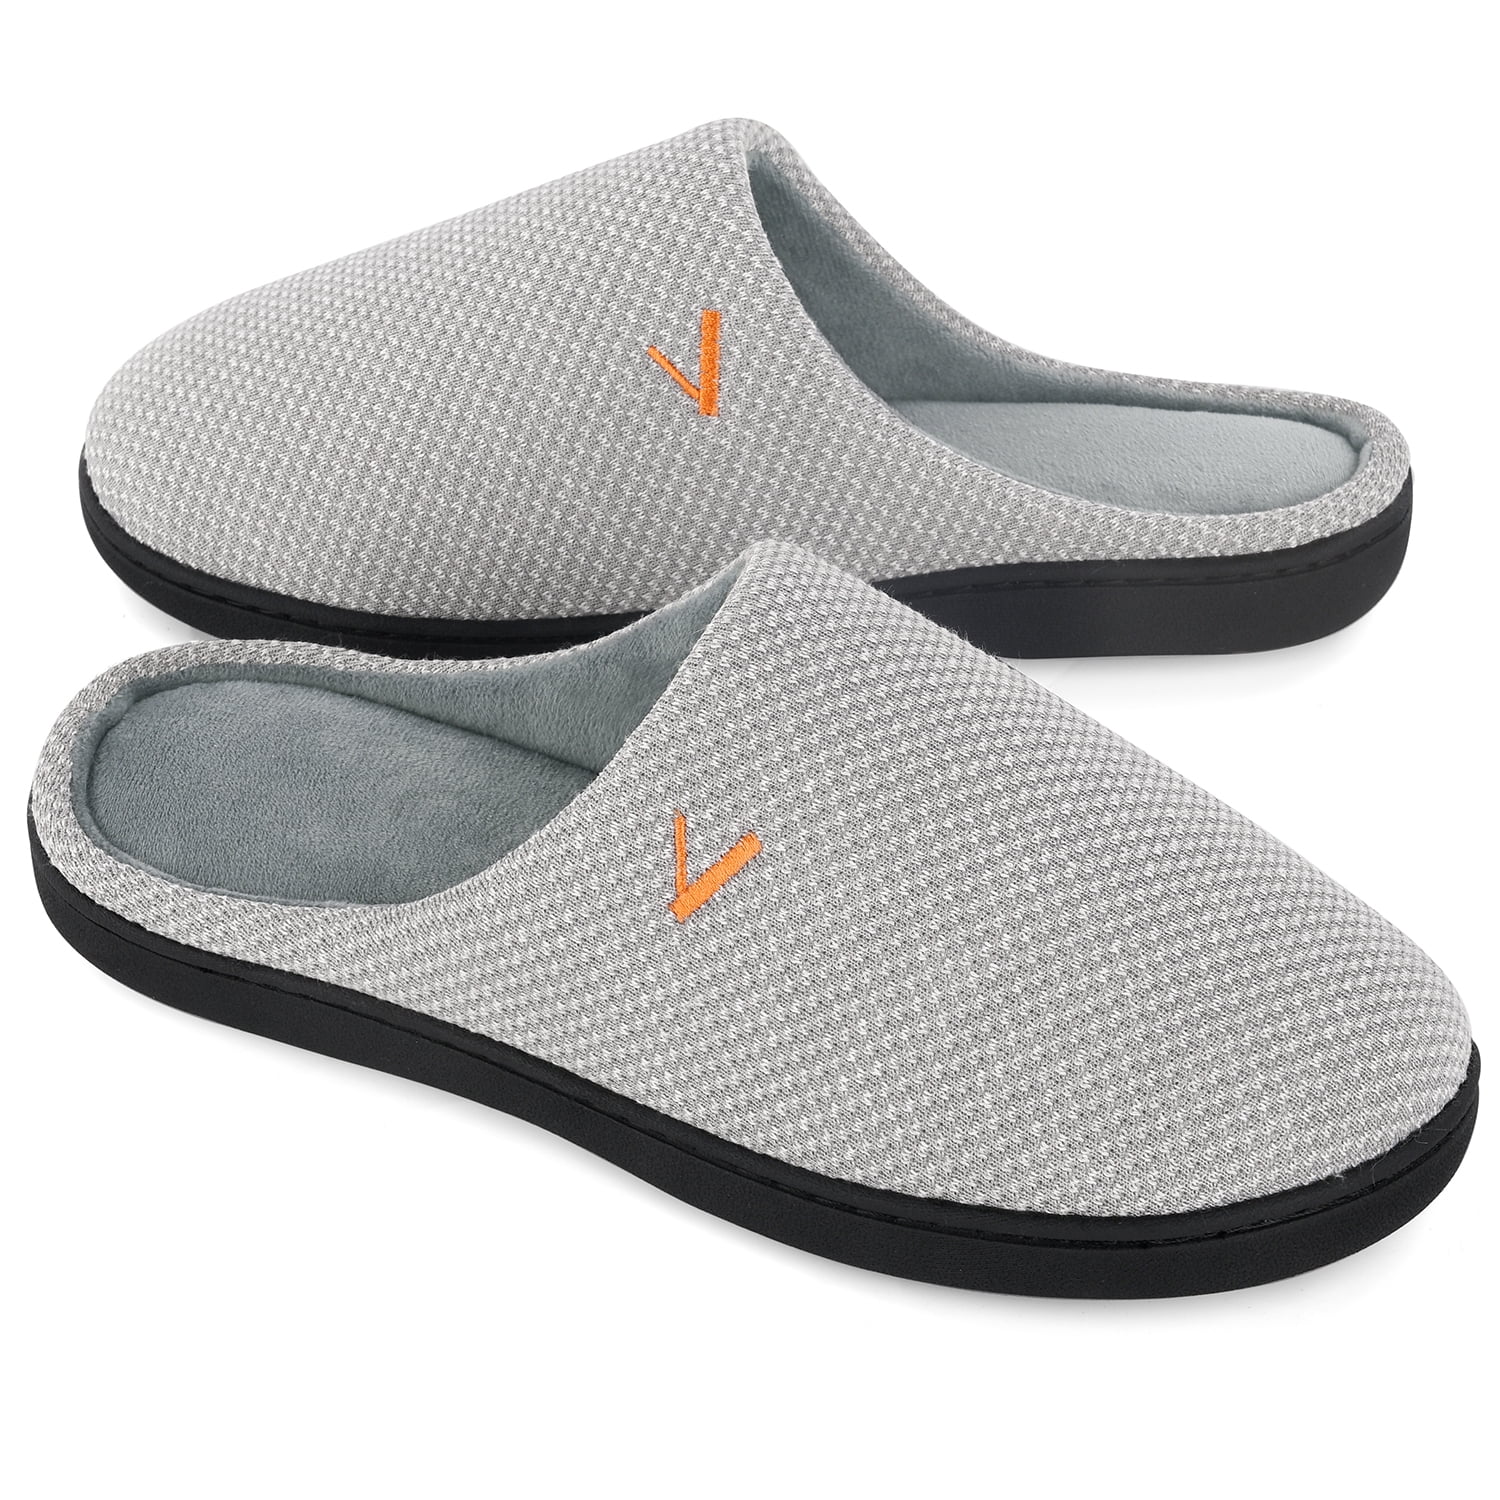 VONMAY Men's Two-Tone Slippers Slip On Memory Foam Comfy House Shoes Lightweight Indoor Outdoor 